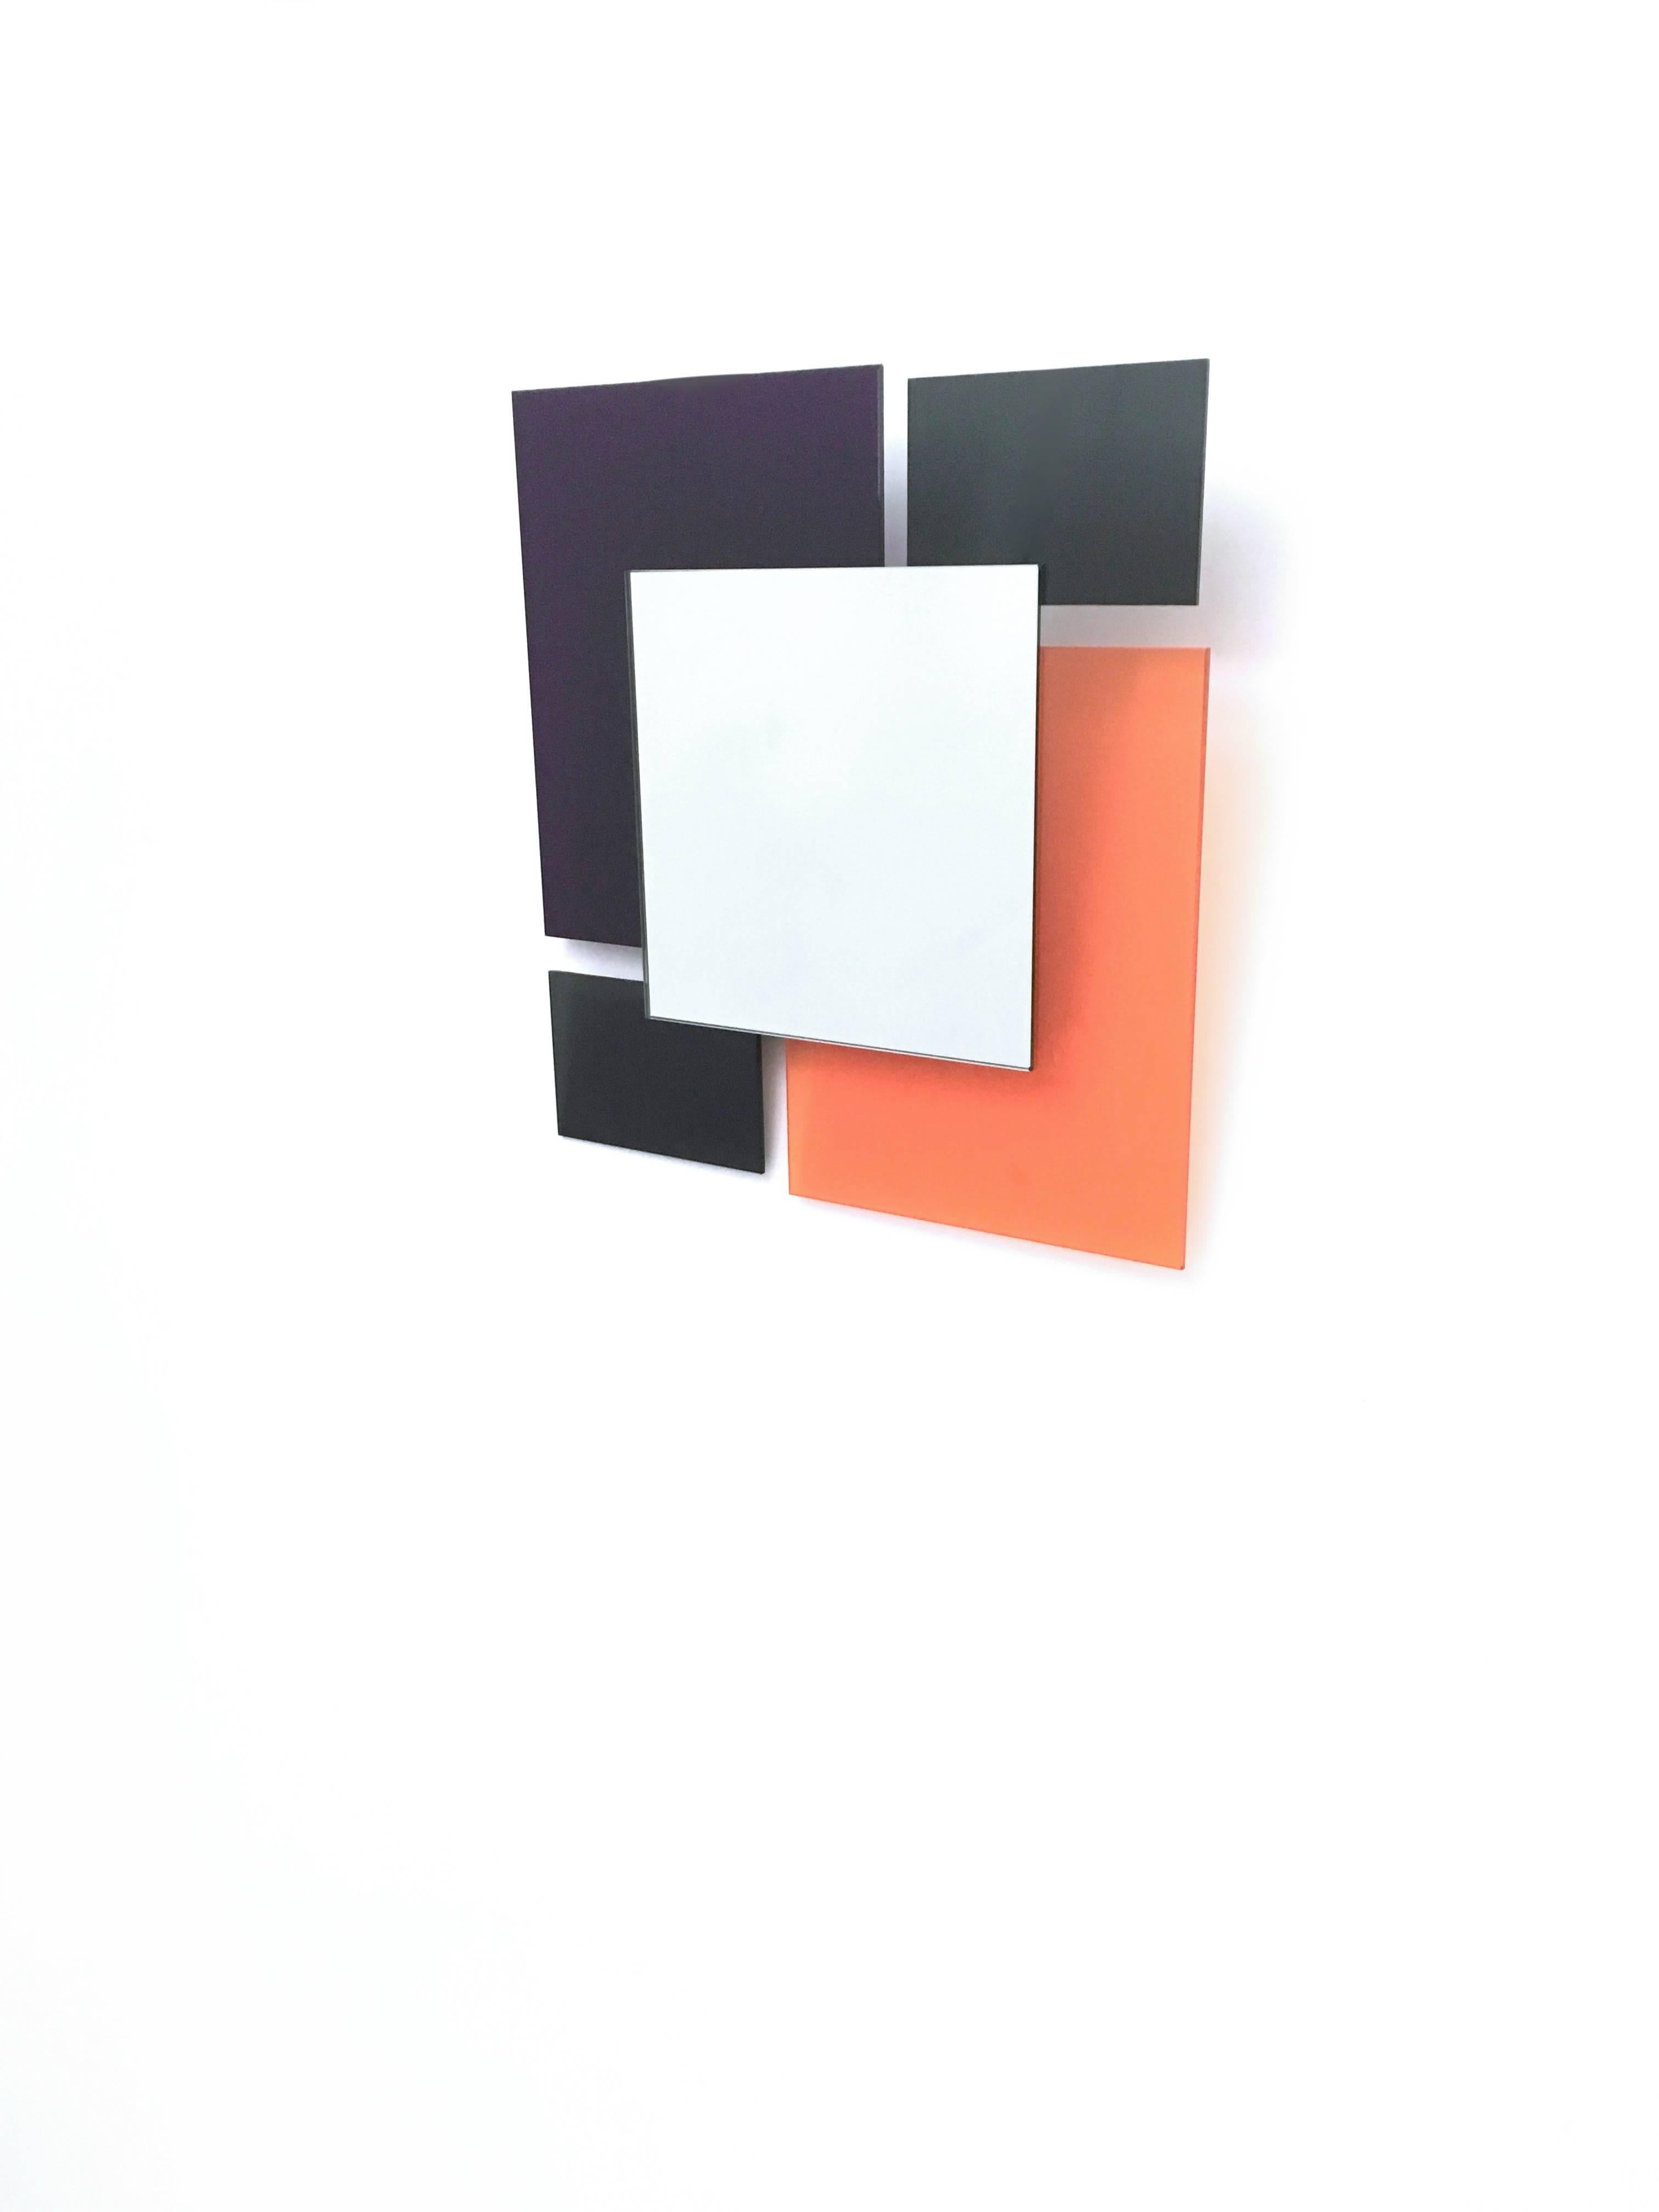 Pair of Postmodern Black and Orange Wall Mirrors in the Style of Sottsass, 1980s In Excellent Condition For Sale In Bresso, Lombardy